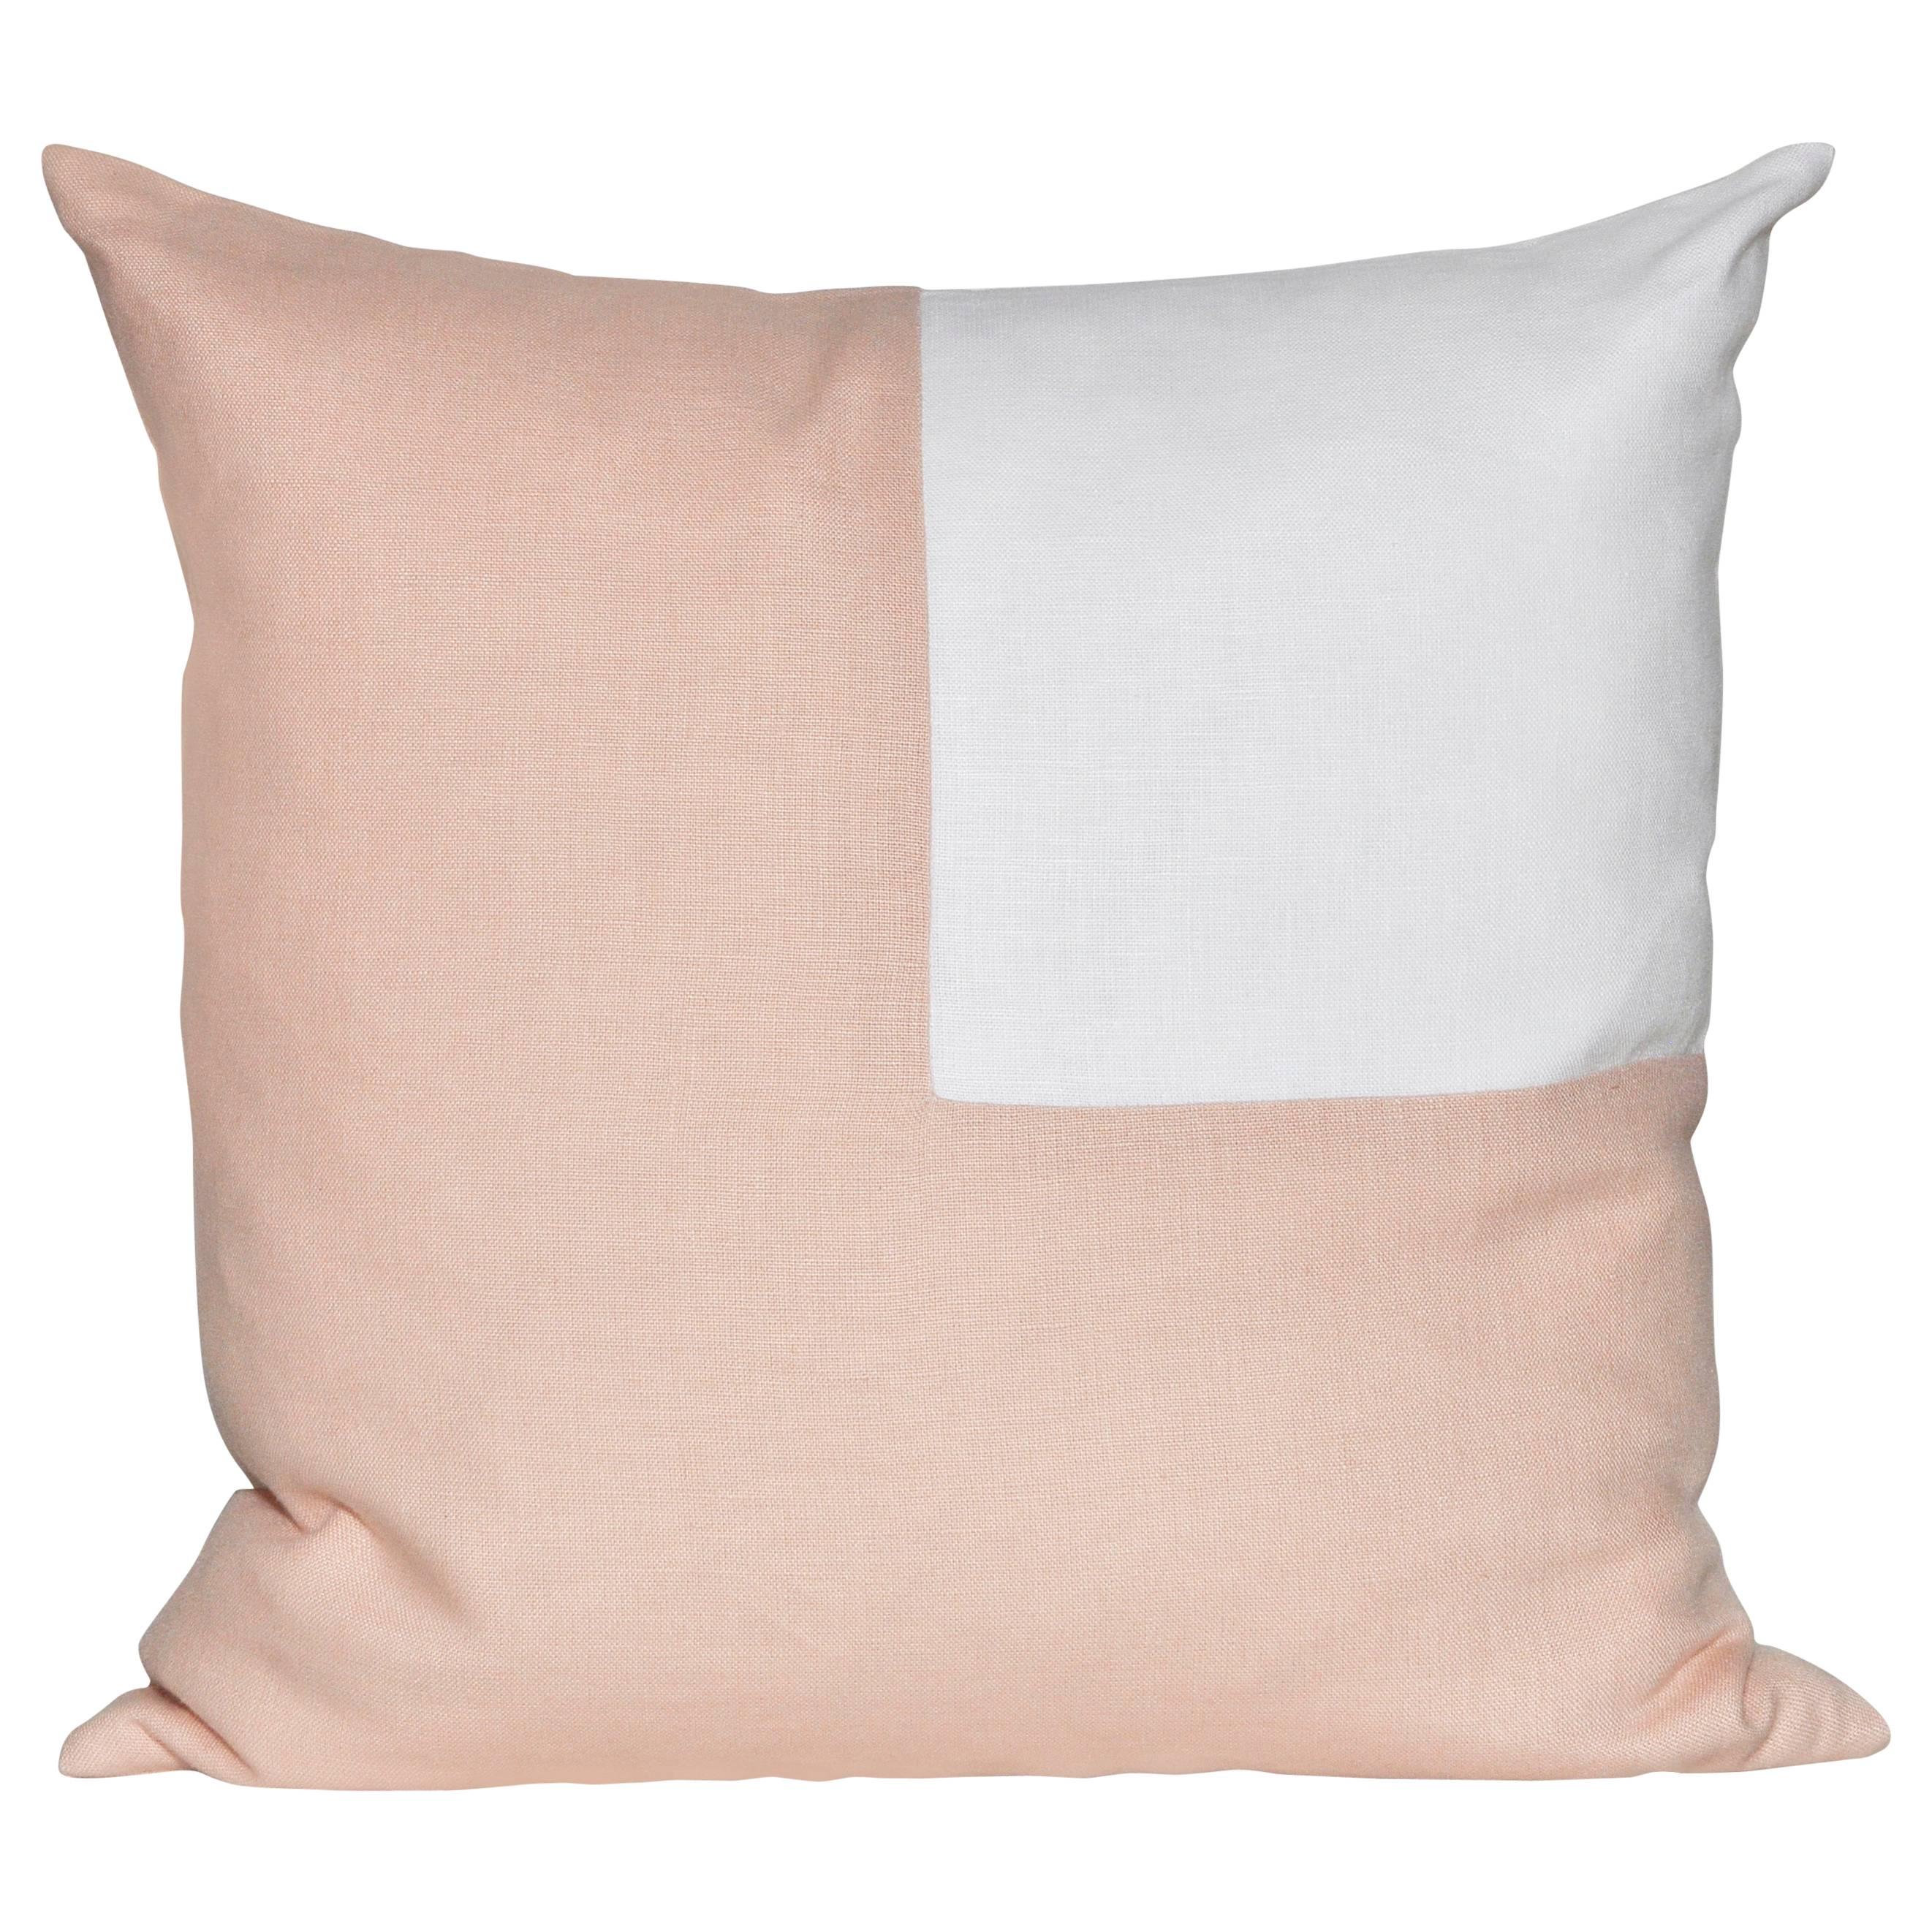 Large, Pink Peach and White Irish Linen Patchwork Cushion Geometric Pillow For Sale